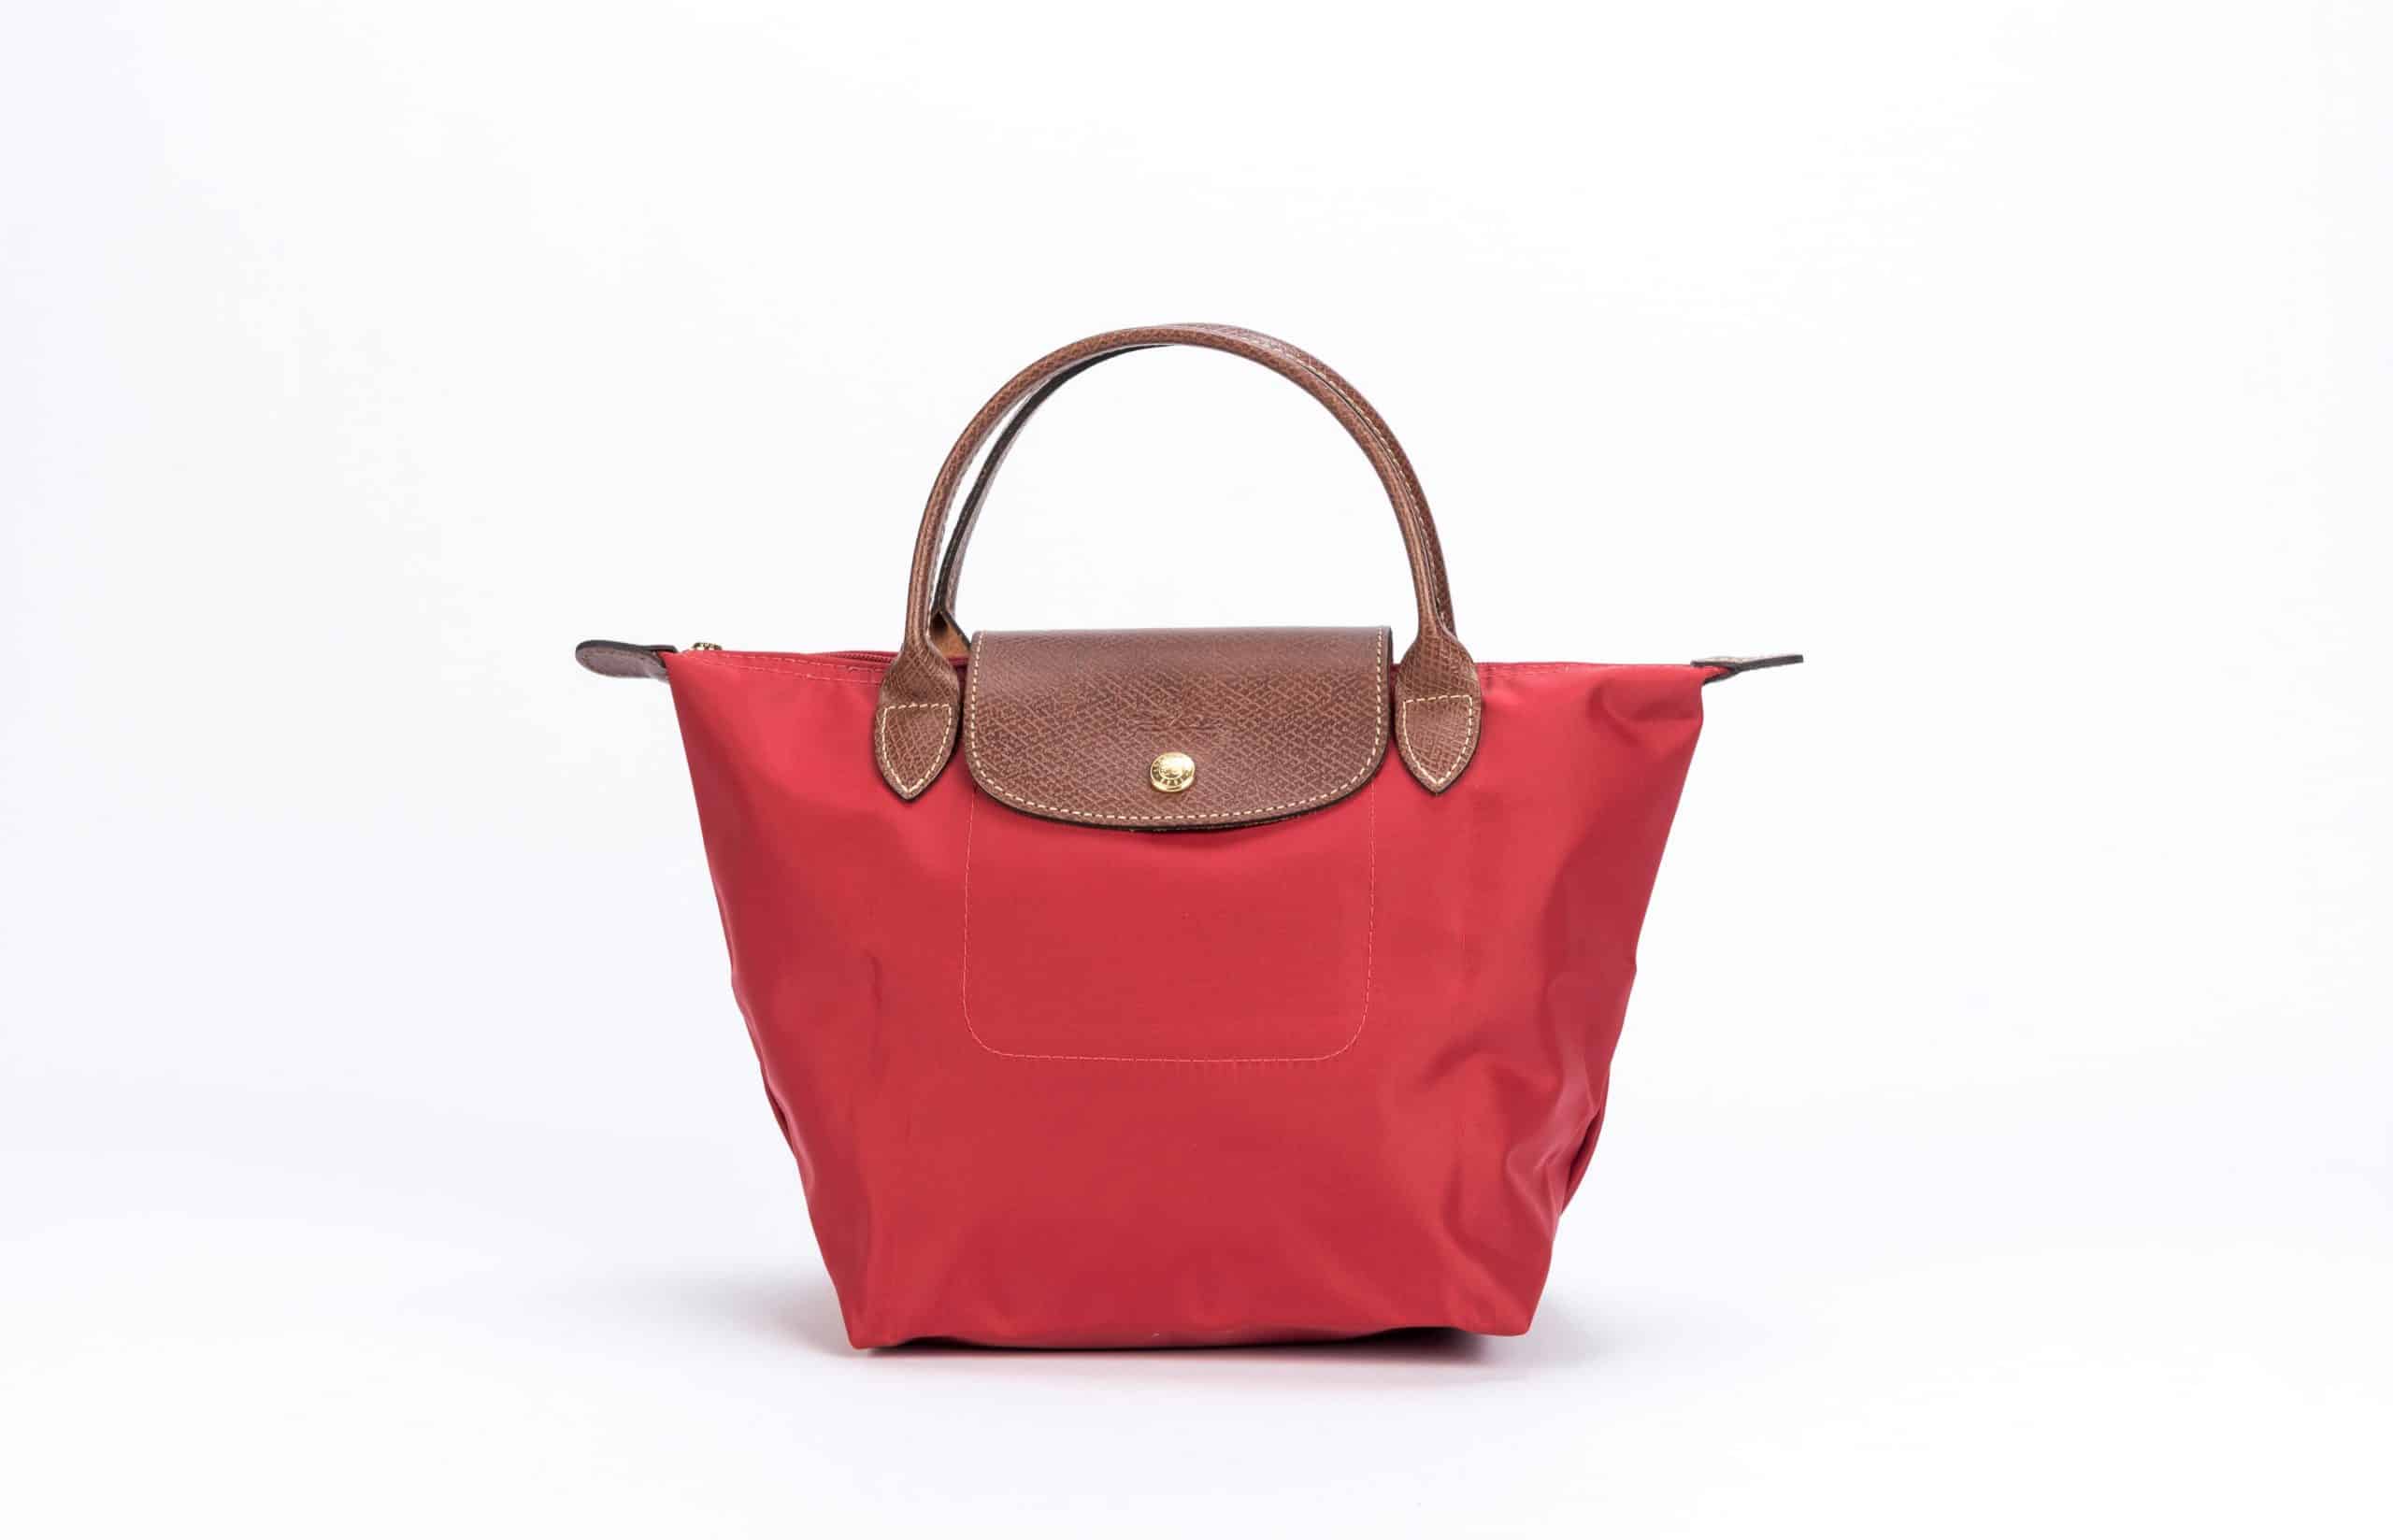 Longchamp Le Pliage Small Tote Bag in Red - 1